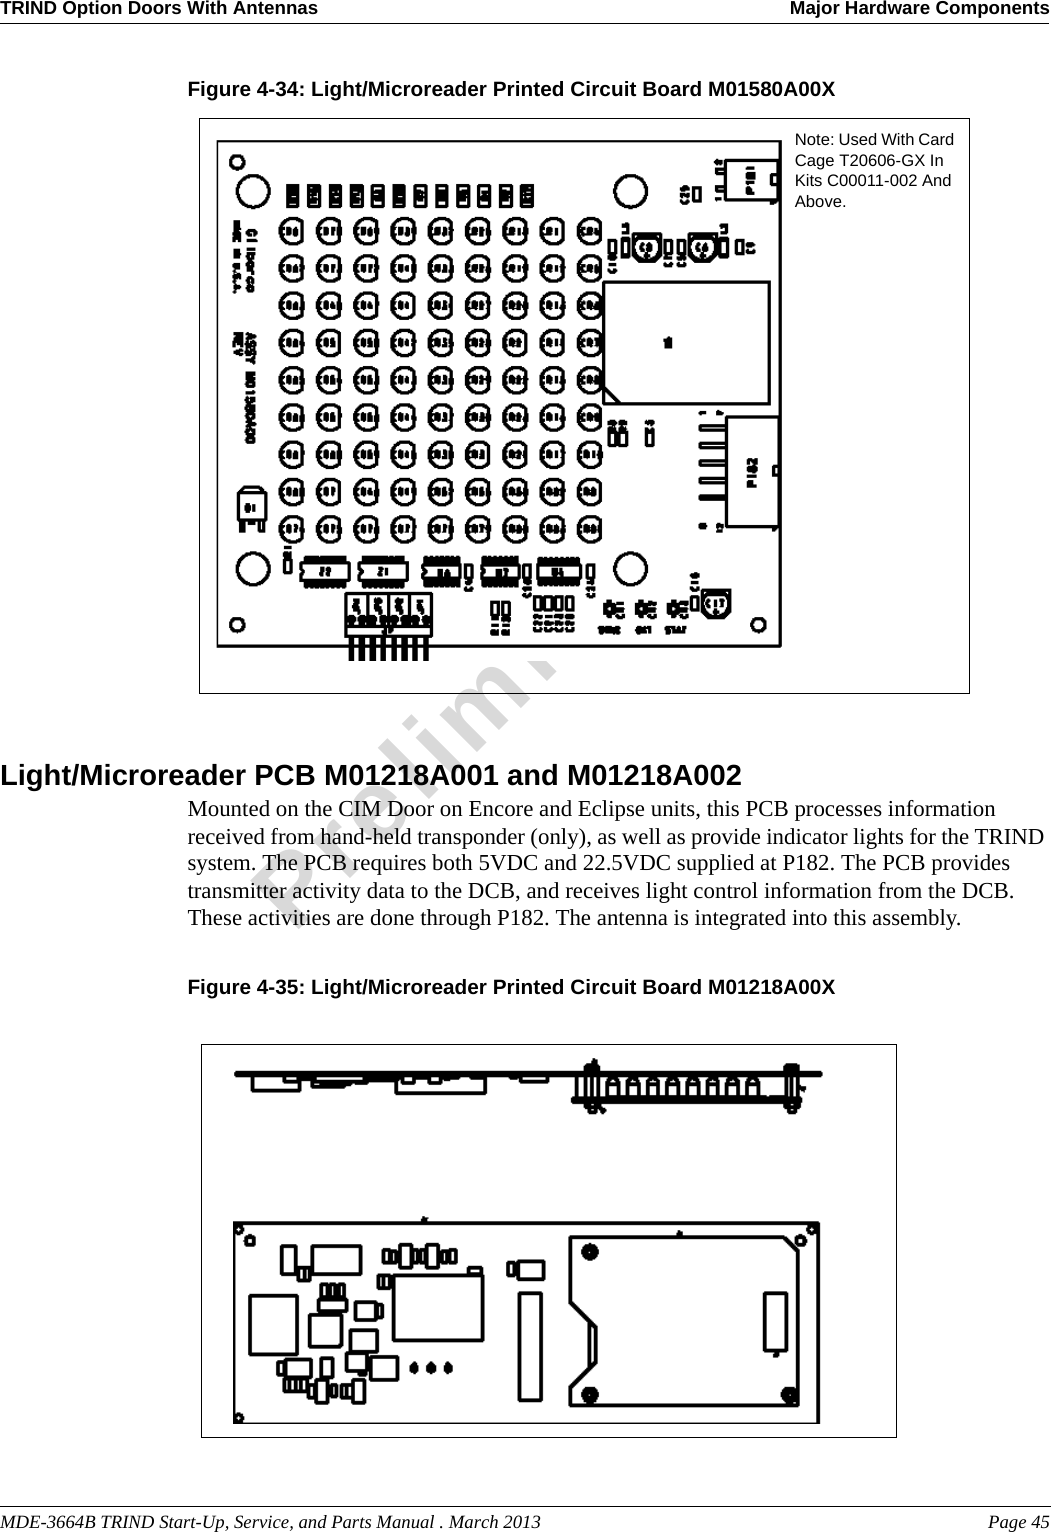 MDE-3664B TRIND Start-Up, Service, and Parts Manual . March 2013 Page 45TRIND Option Doors With Antennas Major Hardware ComponentsPreliminaryFigure 4-34: Light/Microreader Printed Circuit Board M01580A00X Note: Used With Card Cage T20606-GX In Kits C00011-002 And Above.Light/Microreader PCB M01218A001 and M01218A002Mounted on the CIM Door on Encore and Eclipse units, this PCB processes information received from hand-held transponder (only), as well as provide indicator lights for the TRIND system. The PCB requires both 5VDC and 22.5VDC supplied at P182. The PCB provides transmitter activity data to the DCB, and receives light control information from the DCB. These activities are done through P182. The antenna is integrated into this assembly.Figure 4-35: Light/Microreader Printed Circuit Board M01218A00X 